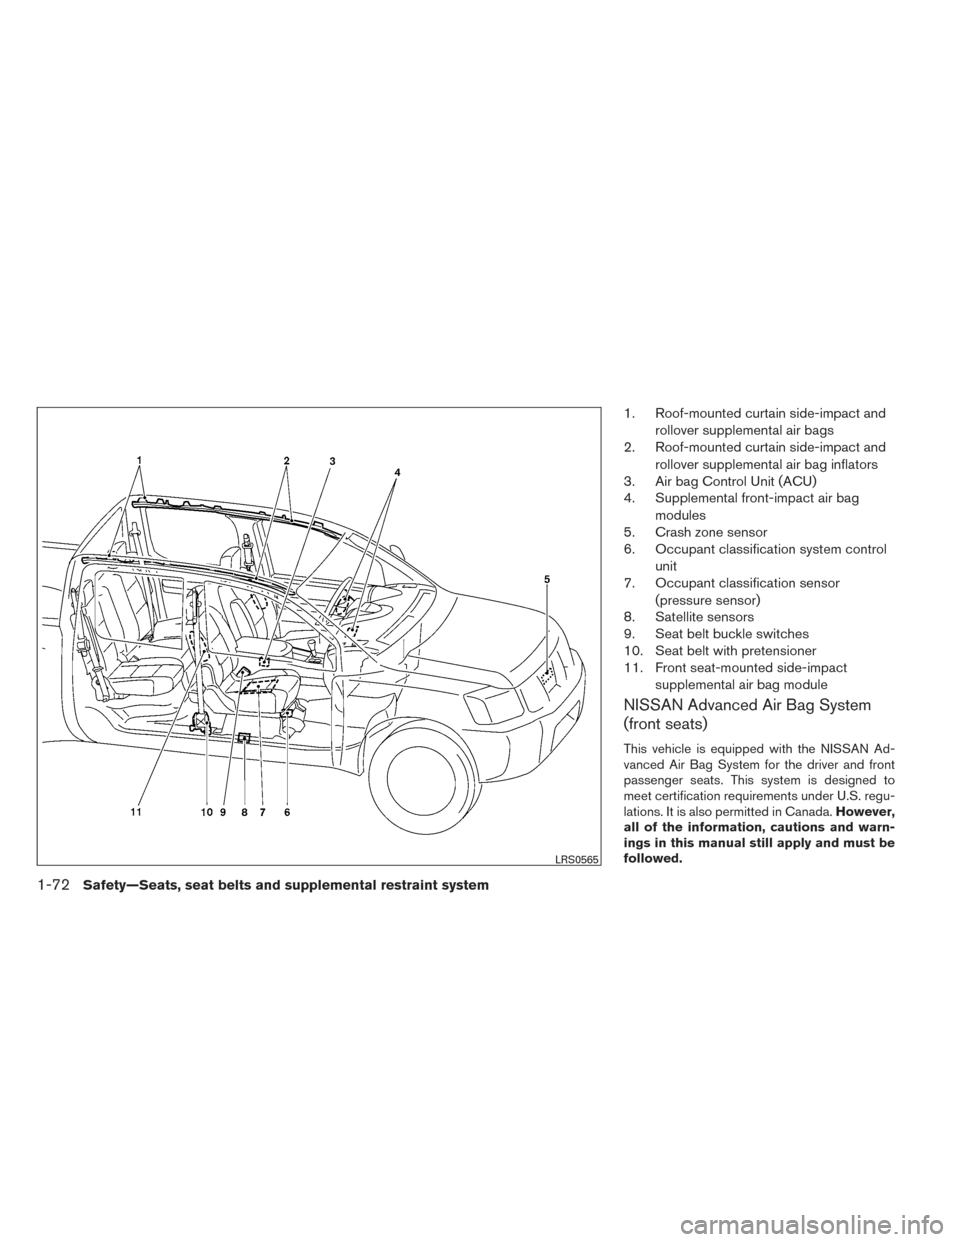 NISSAN FRONTIER 2014 D23 / 3.G Owners Manual 1. Roof-mounted curtain side-impact androllover supplemental air bags
2. Roof-mounted curtain side-impact and
rollover supplemental air bag inflators
3. Air bag Control Unit (ACU)
4. Supplemental fron